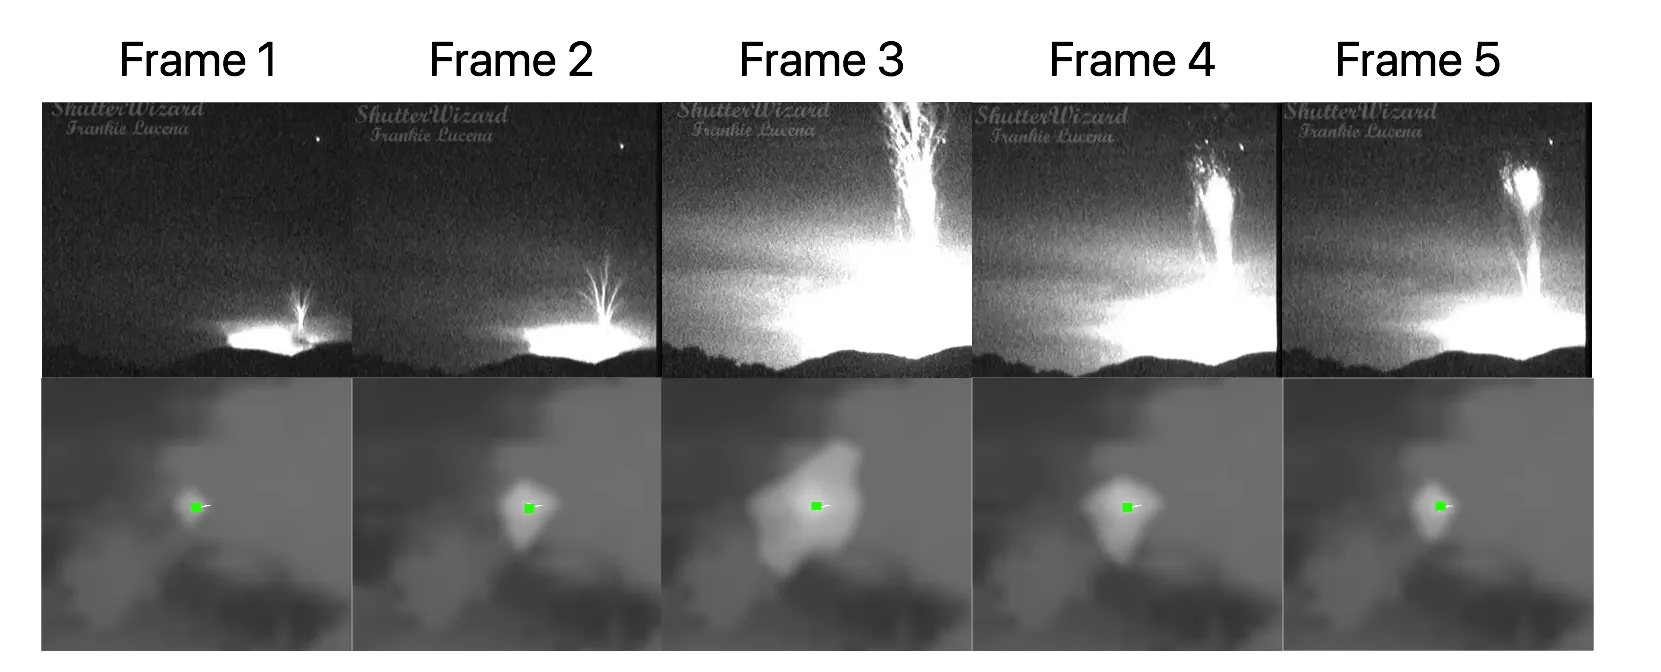 Two rows of images, the top row shows frames from a camera on the ground and the bottom row shows imagery from the Geostationary Lightning Mapper